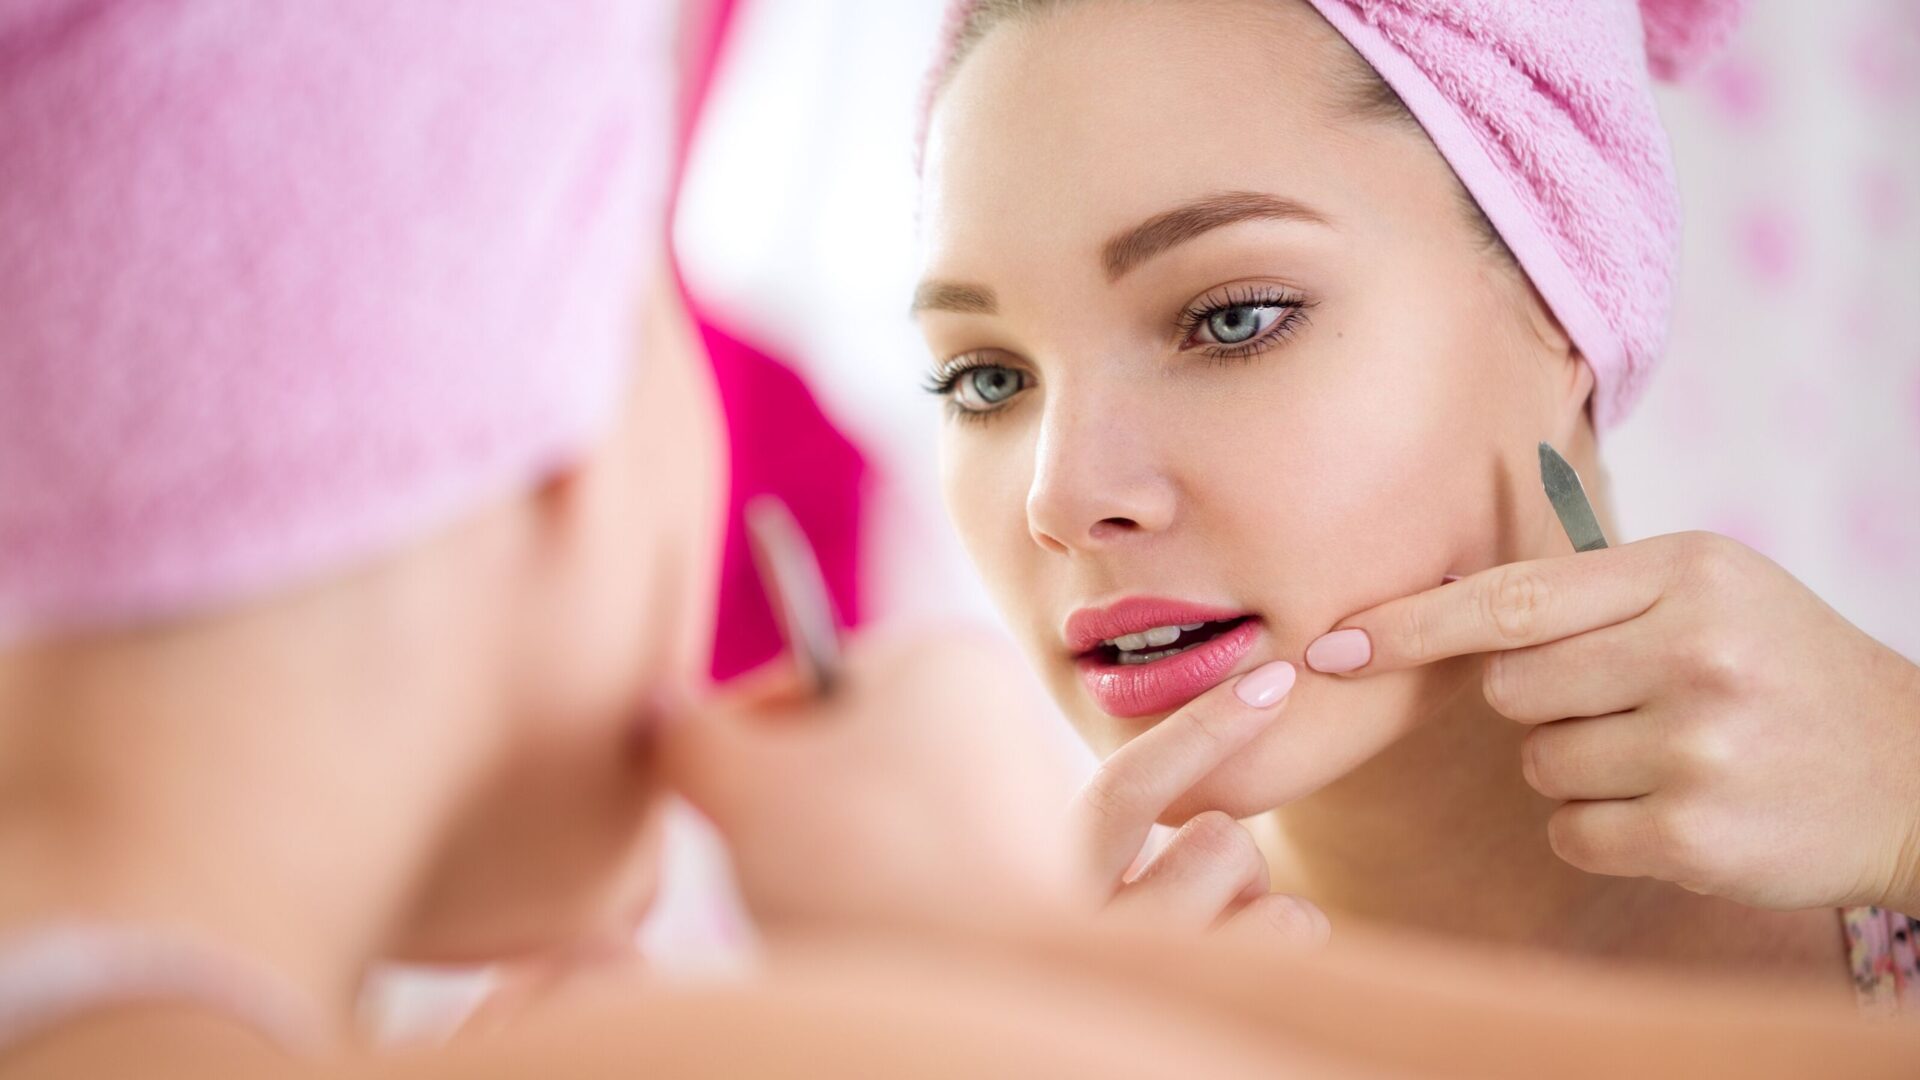 You are currently viewing Remove Pimples (Acne) Overnight Naturally at Home